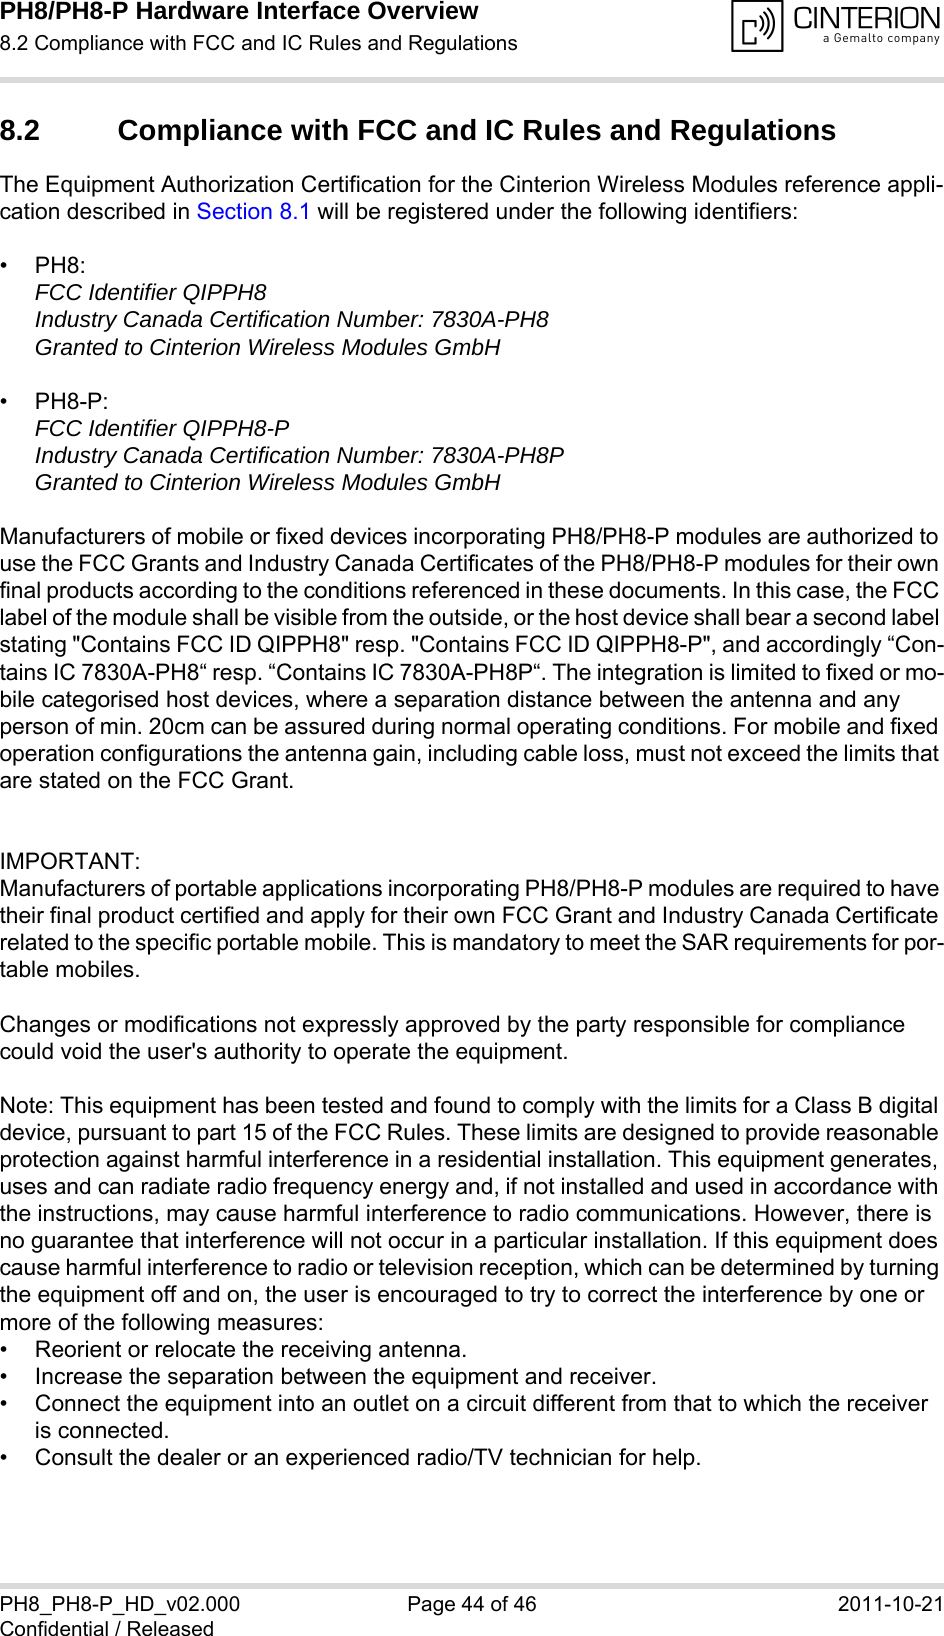 PH8/PH8-P Hardware Interface Overview8.2 Compliance with FCC and IC Rules and Regulations44PH8_PH8-P_HD_v02.000 Page 44 of 46 2011-10-21Confidential / Released8.2 Compliance with FCC and IC Rules and Regulations The Equipment Authorization Certification for the Cinterion Wireless Modules reference appli-cation described in Section 8.1 will be registered under the following identifiers:•PH8:FCC Identifier QIPPH8Industry Canada Certification Number: 7830A-PH8Granted to Cinterion Wireless Modules GmbH •PH8-P:FCC Identifier QIPPH8-PIndustry Canada Certification Number: 7830A-PH8PGranted to Cinterion Wireless Modules GmbH Manufacturers of mobile or fixed devices incorporating PH8/PH8-P modules are authorized to use the FCC Grants and Industry Canada Certificates of the PH8/PH8-P modules for their own final products according to the conditions referenced in these documents. In this case, the FCC label of the module shall be visible from the outside, or the host device shall bear a second label stating &quot;Contains FCC ID QIPPH8&quot; resp. &quot;Contains FCC ID QIPPH8-P&quot;, and accordingly “Con-tains IC 7830A-PH8“ resp. “Contains IC 7830A-PH8P“. The integration is limited to fixed or mo-bile categorised host devices, where a separation distance between the antenna and any person of min. 20cm can be assured during normal operating conditions. For mobile and fixed operation configurations the antenna gain, including cable loss, must not exceed the limits that are stated on the FCC Grant.IMPORTANT:Manufacturers of portable applications incorporating PH8/PH8-P modules are required to have their final product certified and apply for their own FCC Grant and Industry Canada Certificate related to the specific portable mobile. This is mandatory to meet the SAR requirements for por-table mobiles.Changes or modifications not expressly approved by the party responsible for compliance could void the user&apos;s authority to operate the equipment.Note: This equipment has been tested and found to comply with the limits for a Class B digital device, pursuant to part 15 of the FCC Rules. These limits are designed to provide reasonable protection against harmful interference in a residential installation. This equipment generates, uses and can radiate radio frequency energy and, if not installed and used in accordance with the instructions, may cause harmful interference to radio communications. However, there is no guarantee that interference will not occur in a particular installation. If this equipment does cause harmful interference to radio or television reception, which can be determined by turning the equipment off and on, the user is encouraged to try to correct the interference by one or more of the following measures: • Reorient or relocate the receiving antenna. • Increase the separation between the equipment and receiver. • Connect the equipment into an outlet on a circuit different from that to which the receiver is connected. • Consult the dealer or an experienced radio/TV technician for help.